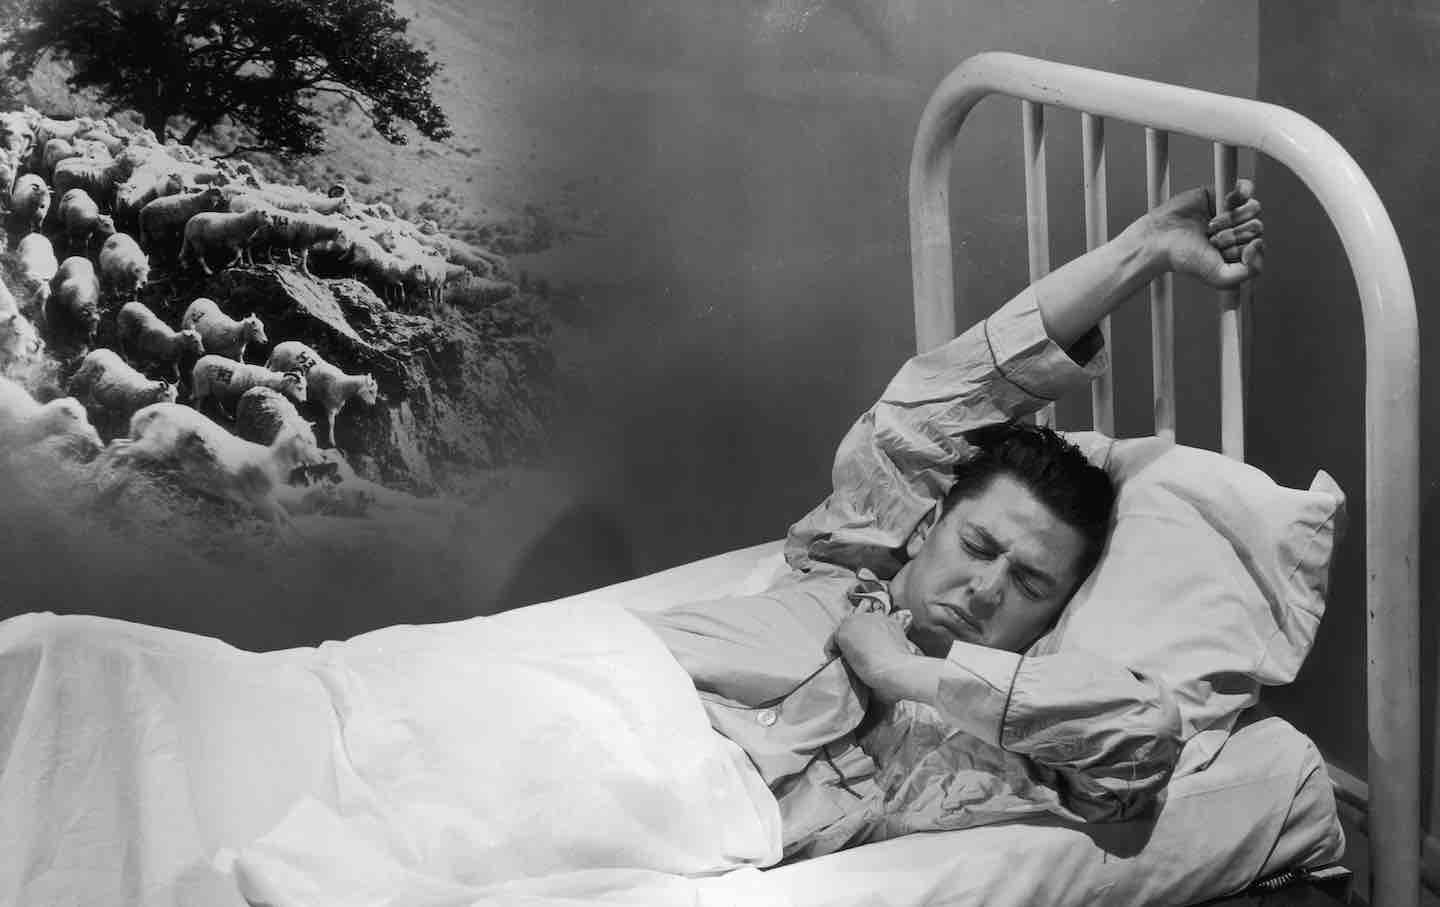 A man fights a losing battle with insomnia by counting sheep, 1940.